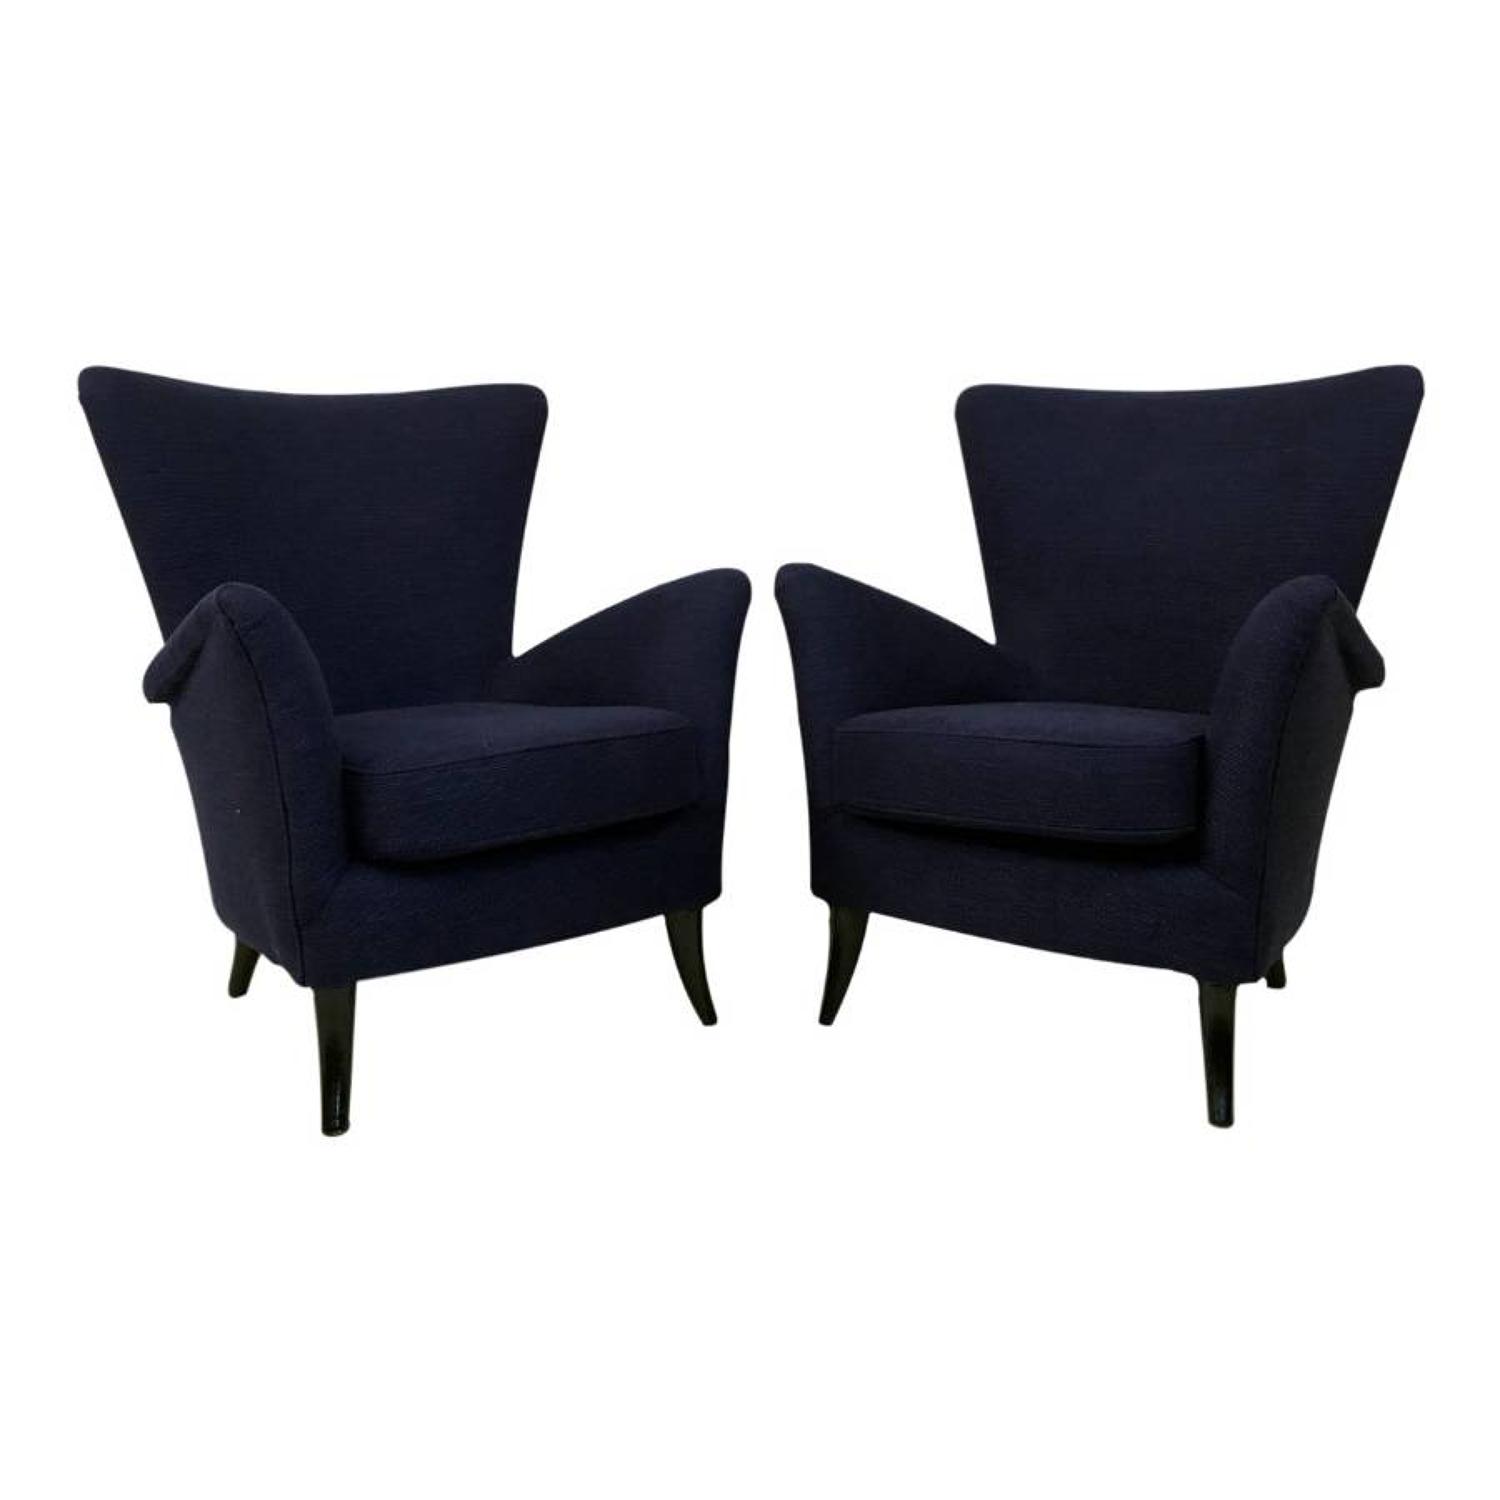 A pair of 1950s Italian armchairs in blue weave